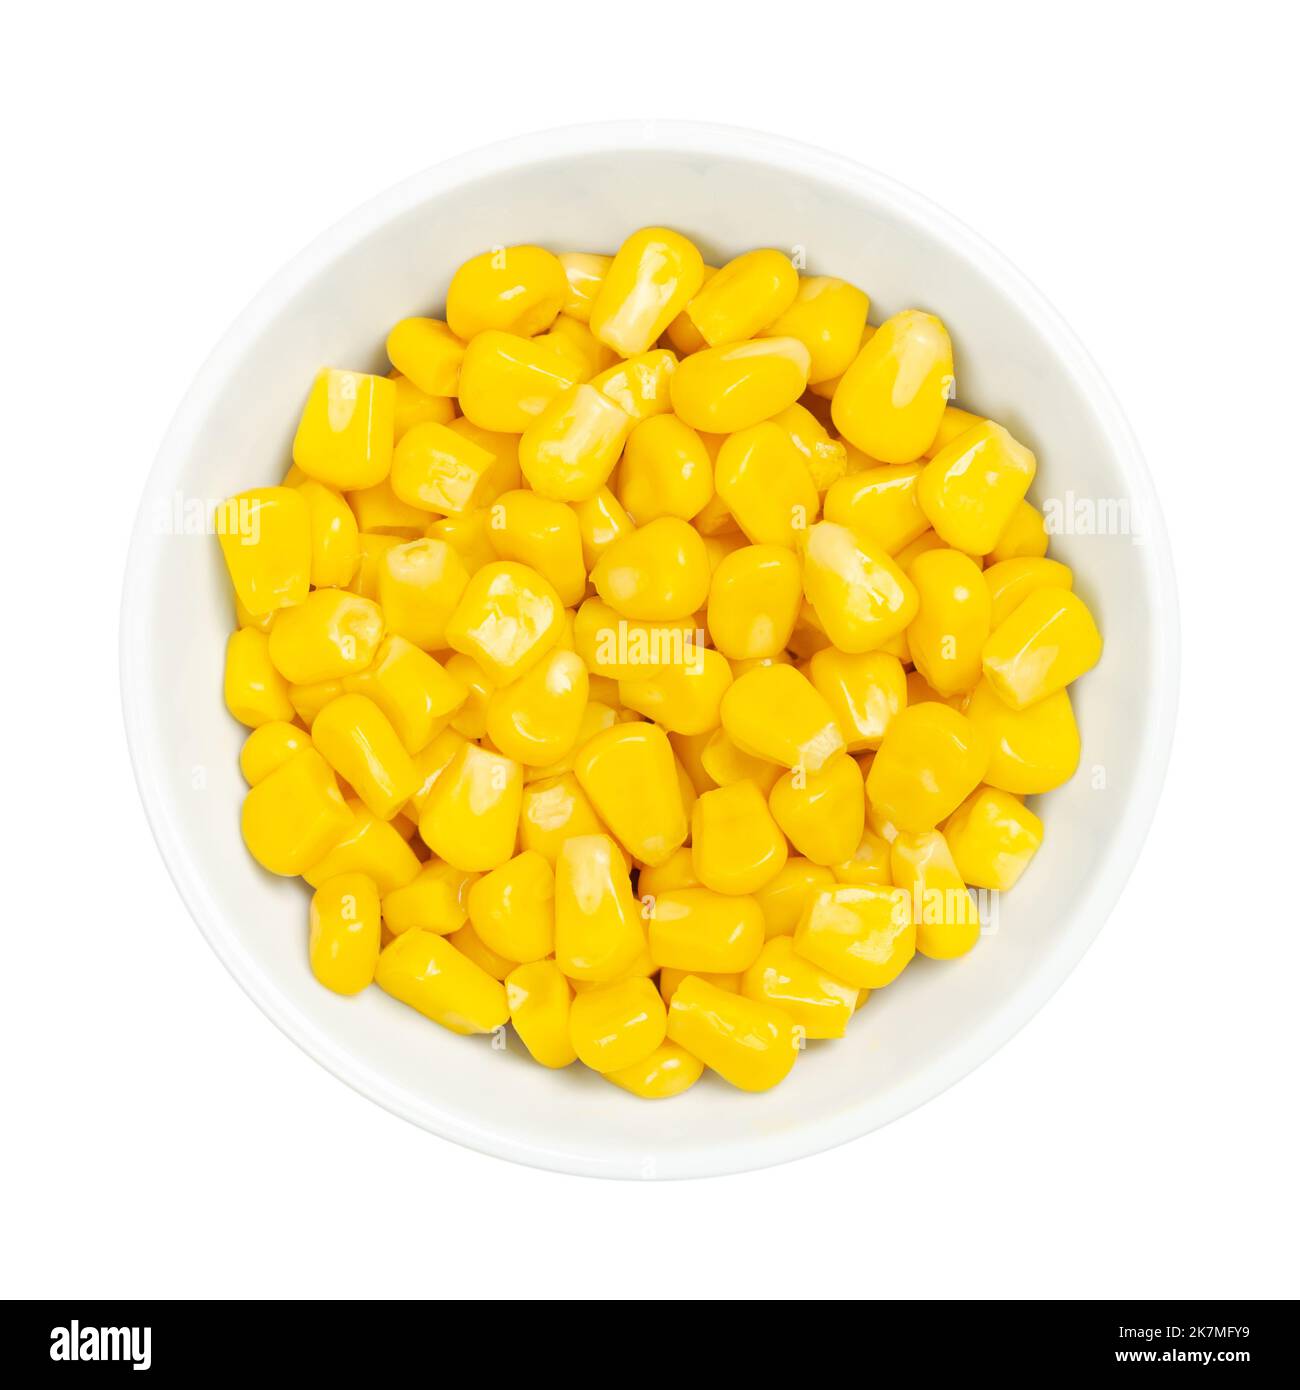 Sweet corn kernels, in a white bowl over white. Cooked canned yellow vegetable maize, Zea mays, also called sugar or pole corn. Stock Photo